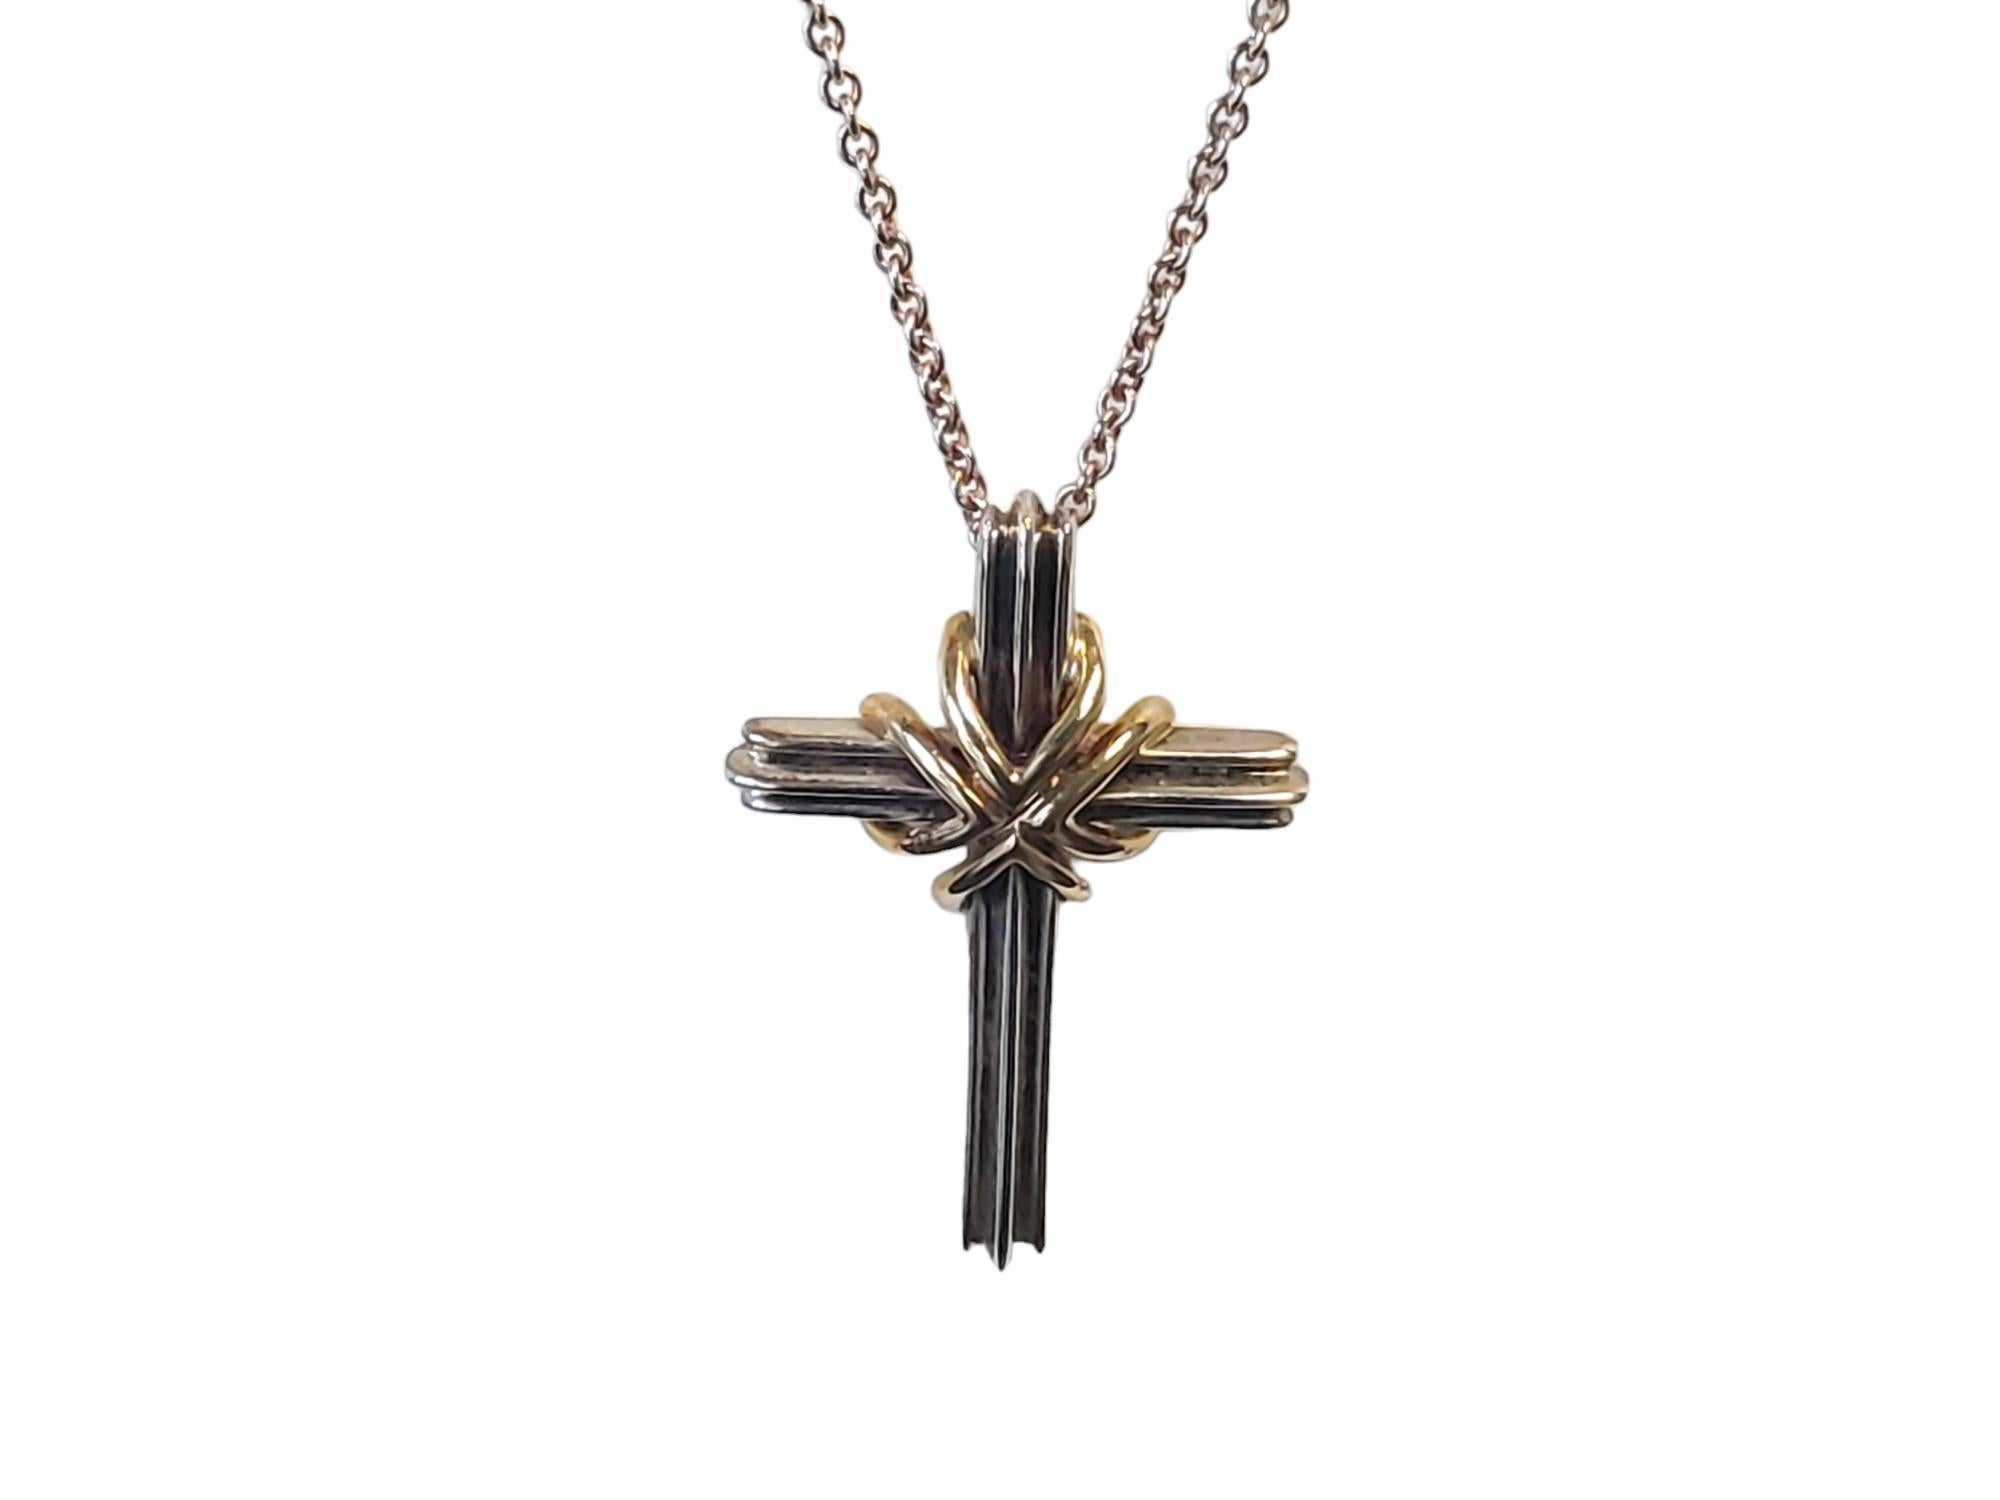 Vintage Tiffany Sterling 18k Cross and Necklace

Listed is a vintage Tiffany & Co. sterling and 18k yellow gold cross with 24